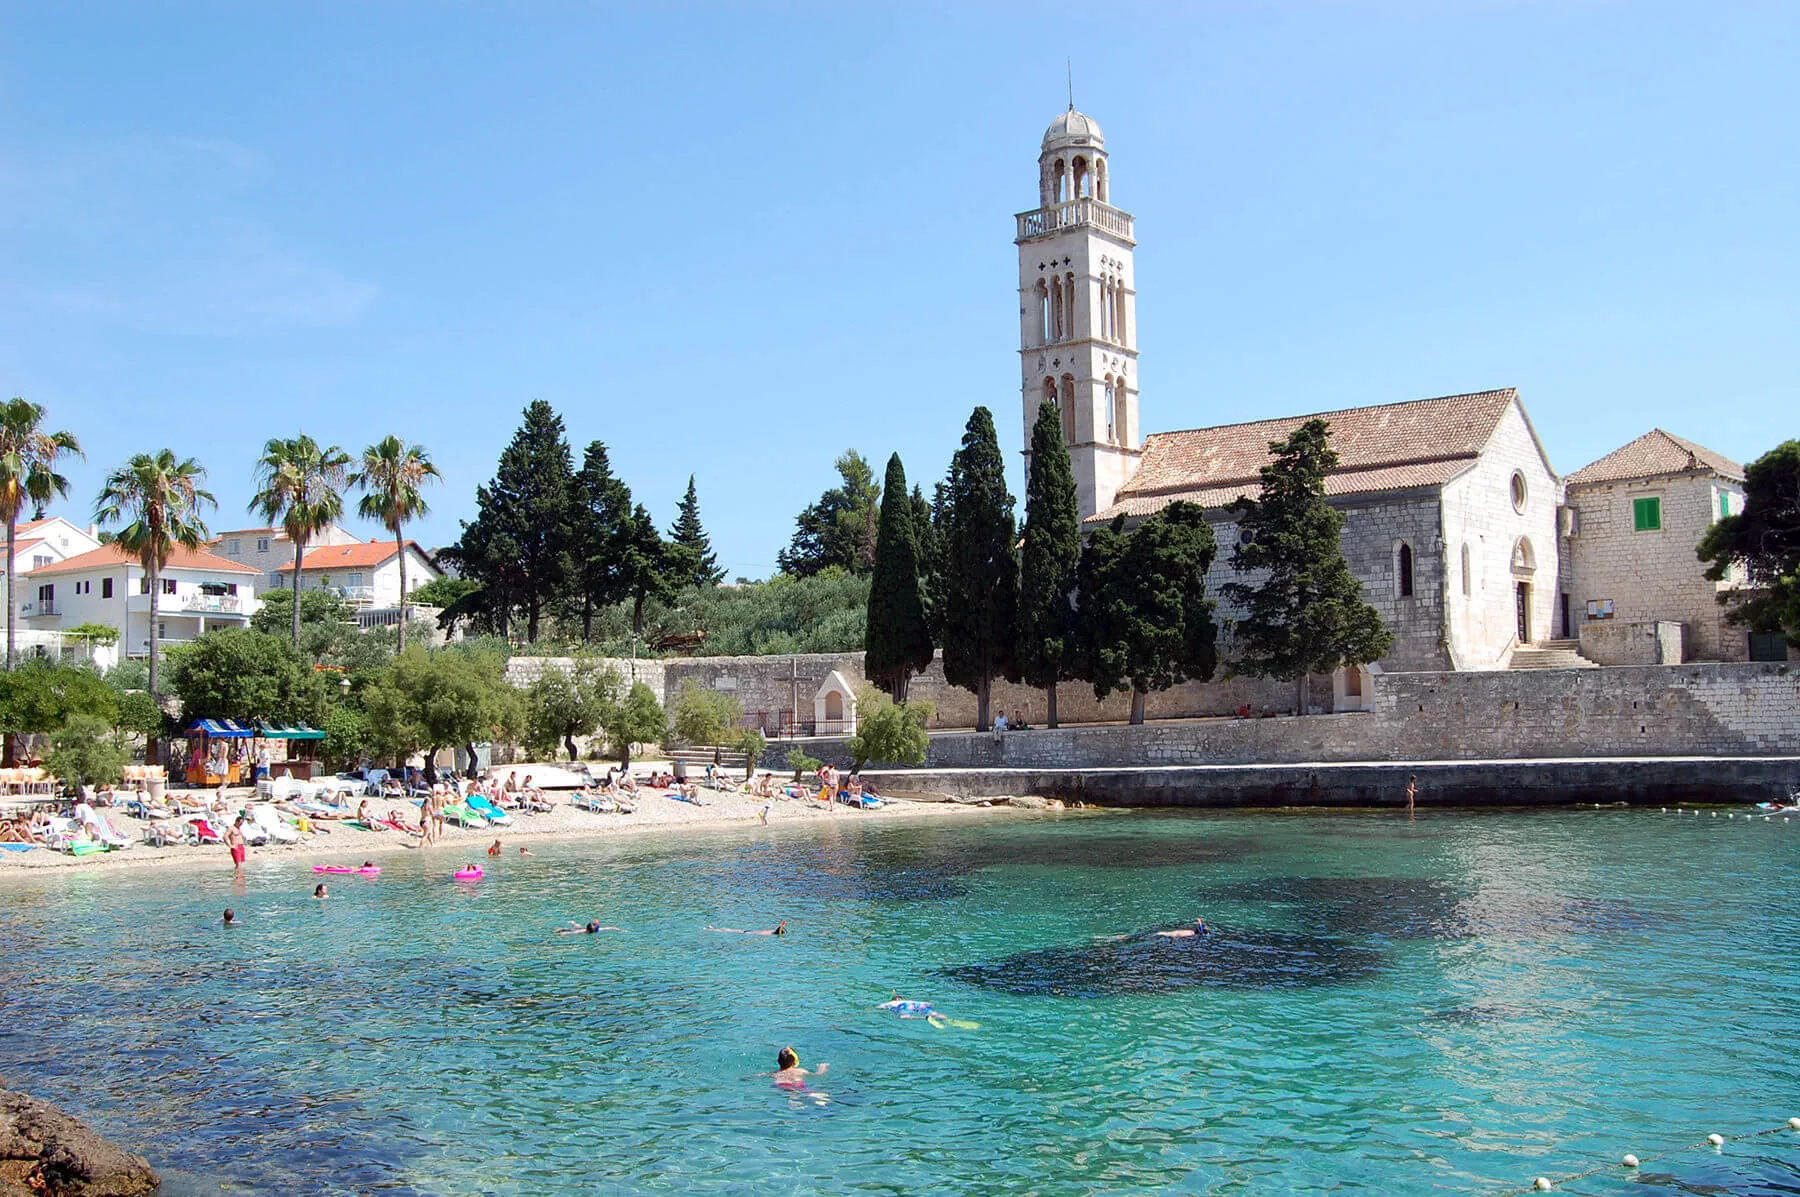 The island of Hvar offers a number of pebbly beaches and crystal-clear water for swimming